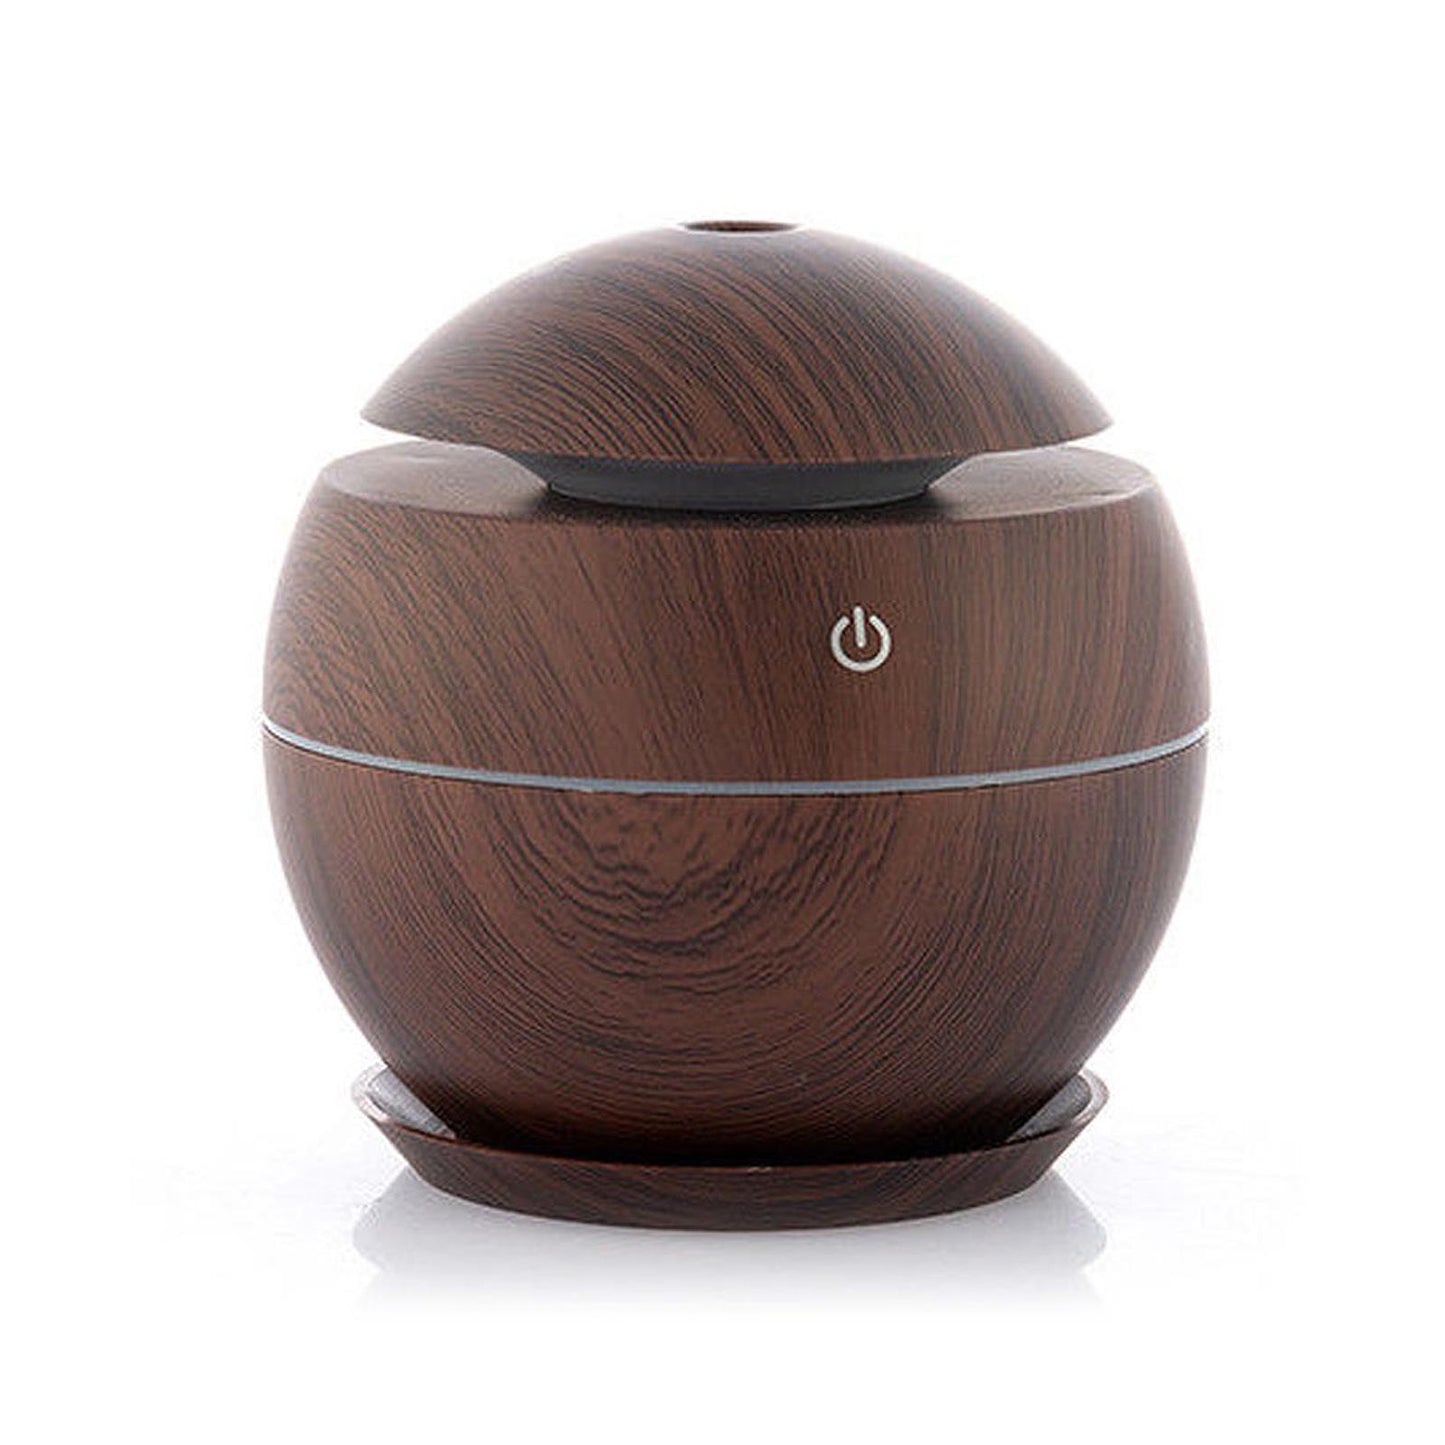 Portable Usb Aroma Diffuser For Home And Car